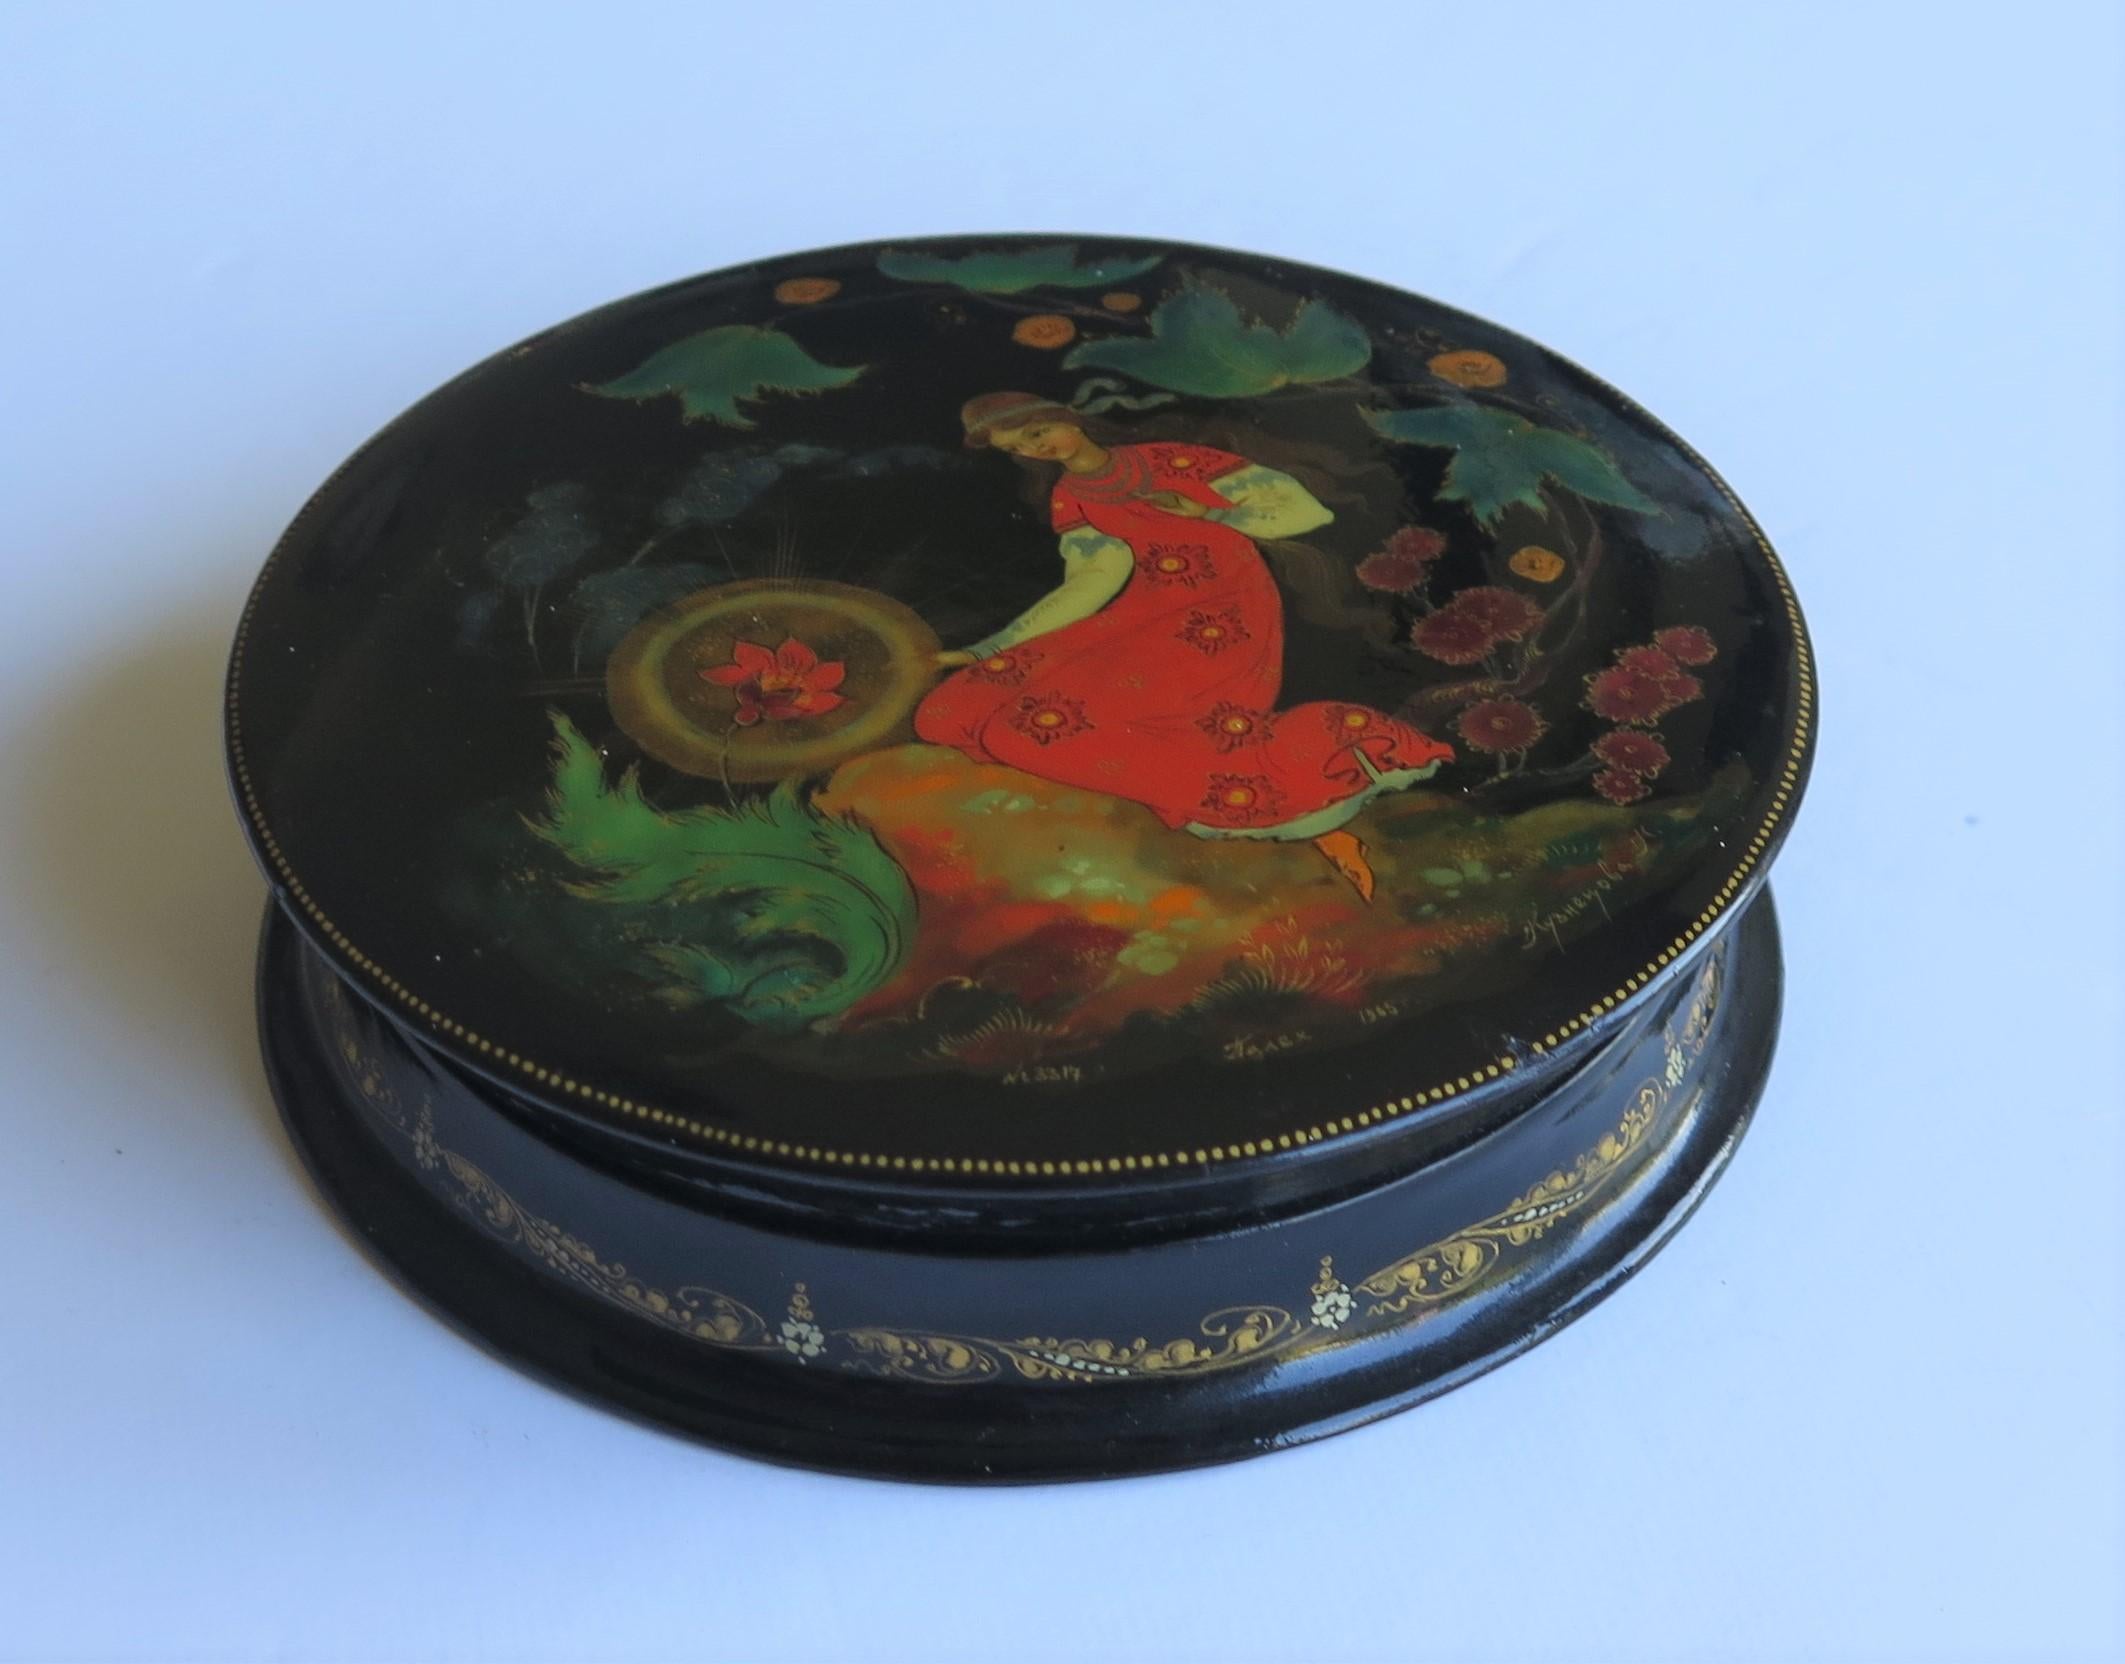 This is a very finely hand painted lidded lacquered box made in Russia, fully signed and dated 1965 which we attribute to the Palekh region workshop. 

The circular box has been beautifully made and decorated. It is very finely hand painted with a